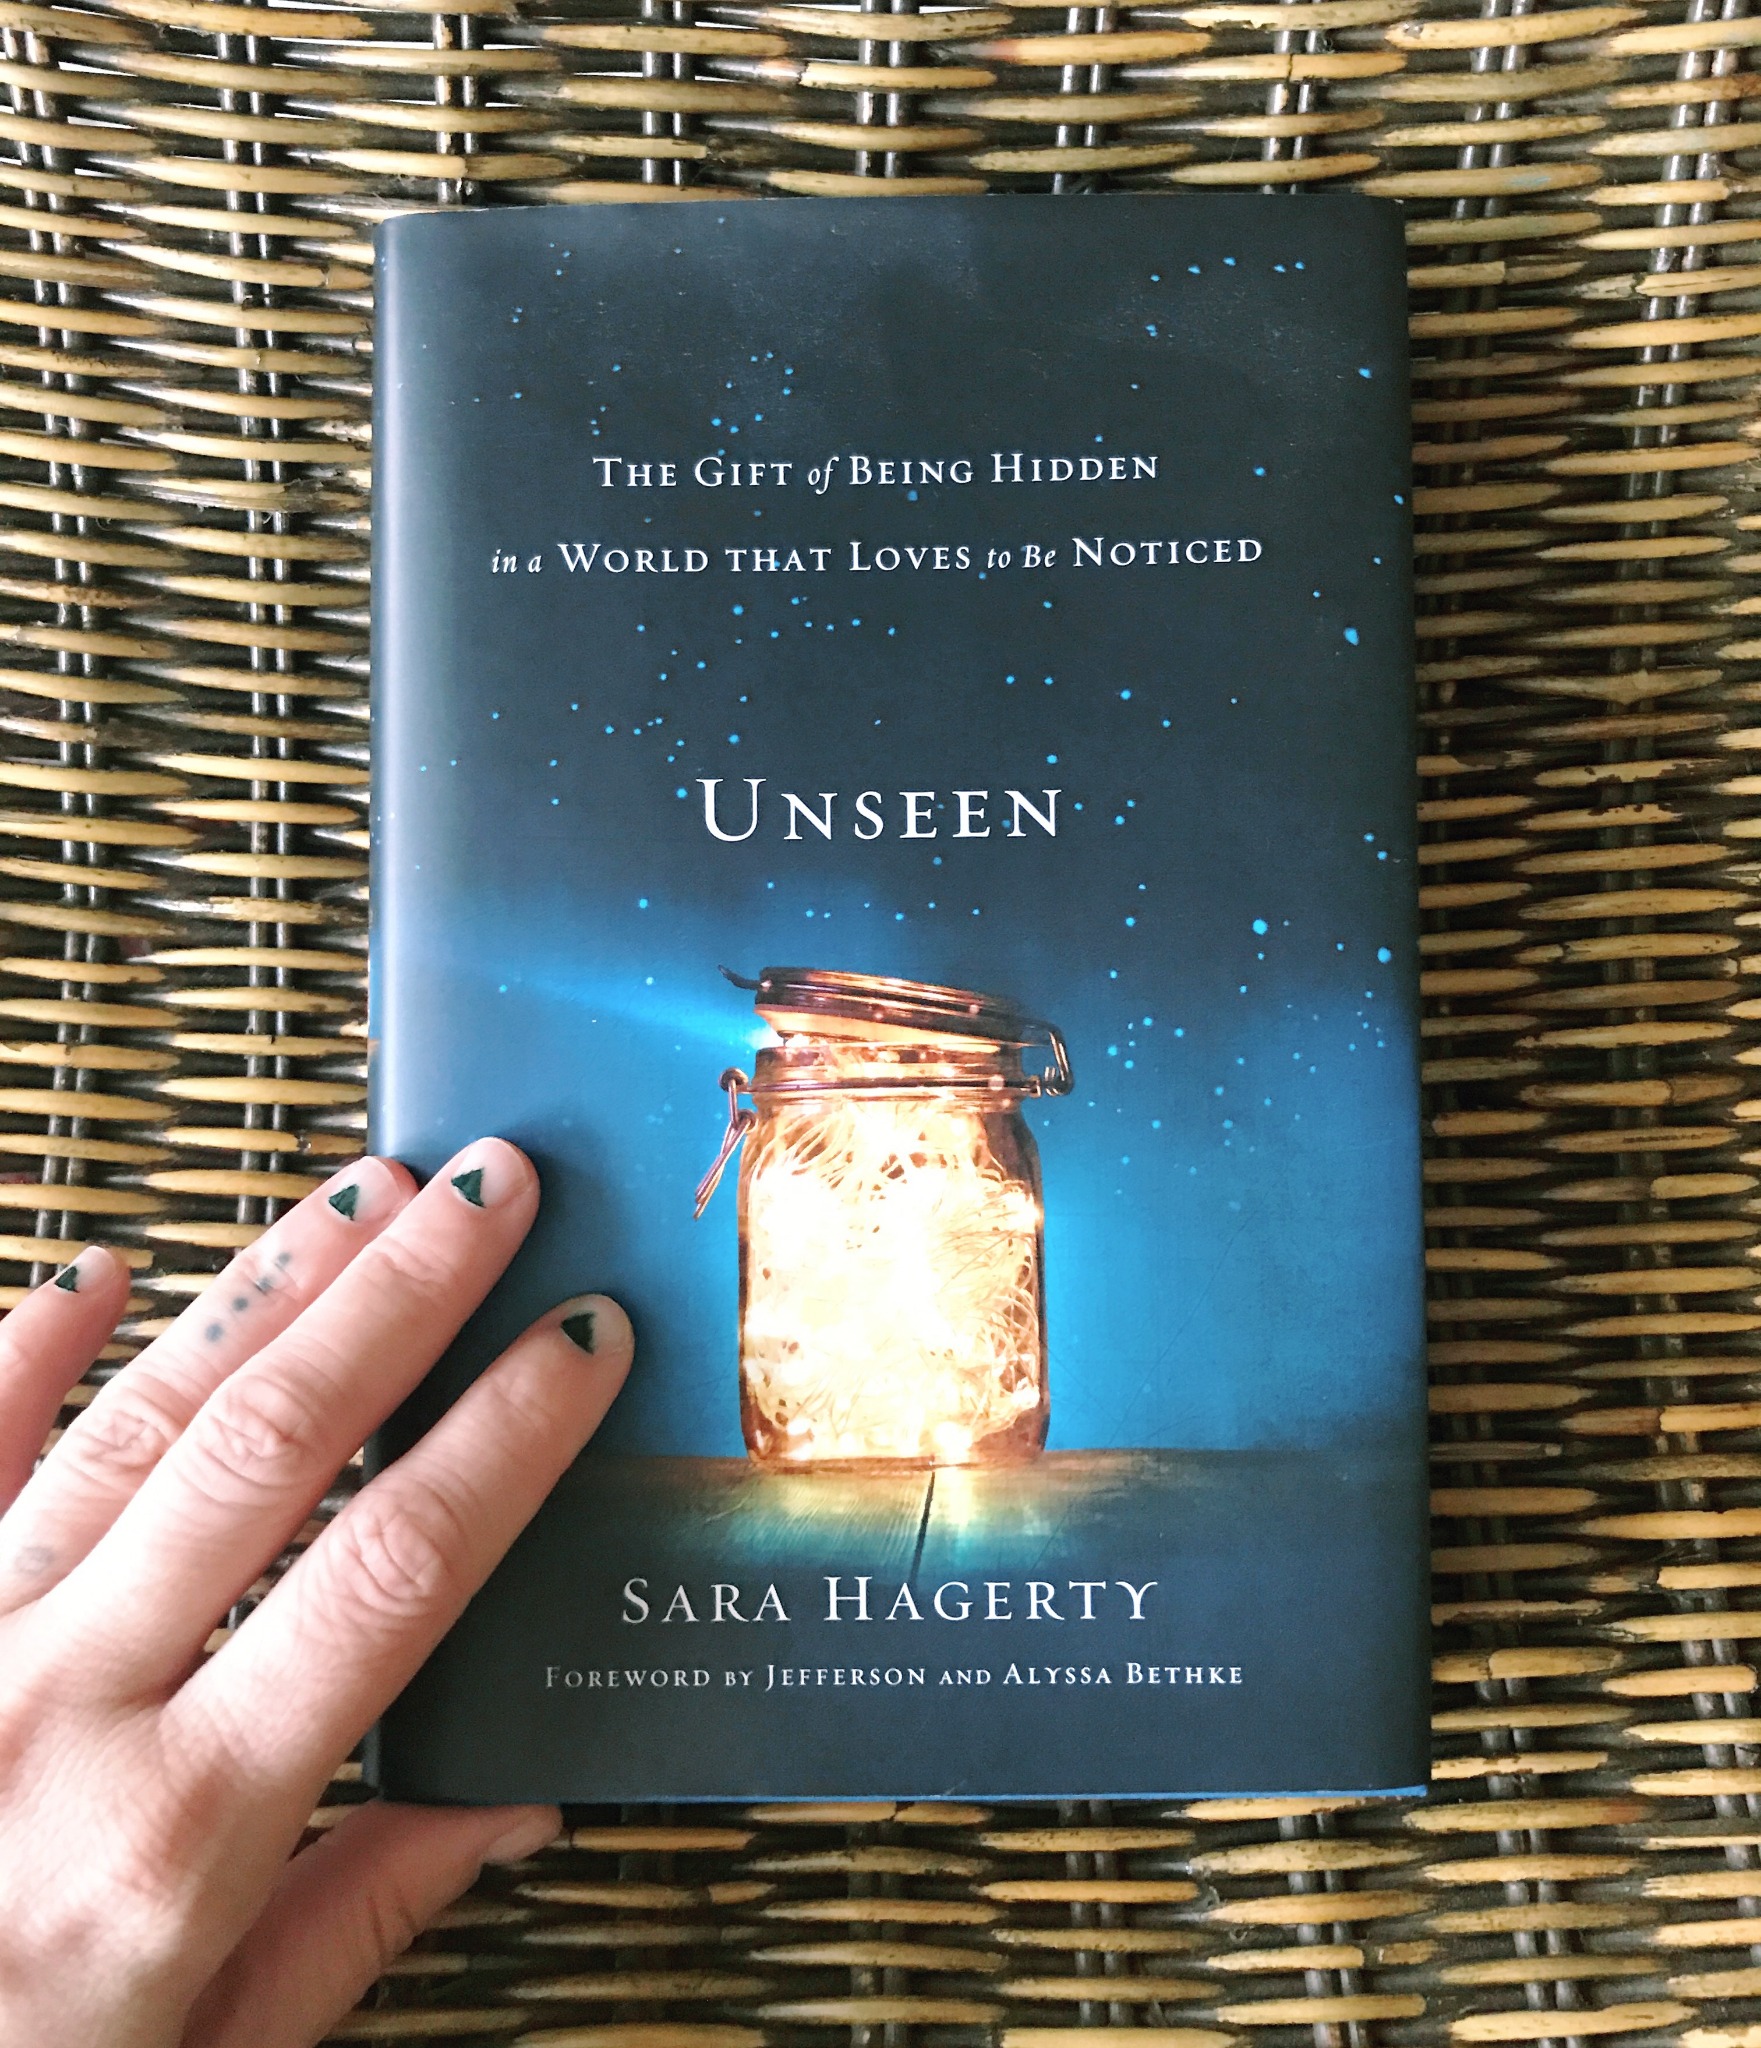 Unseen by Sara Hagerty Book Review